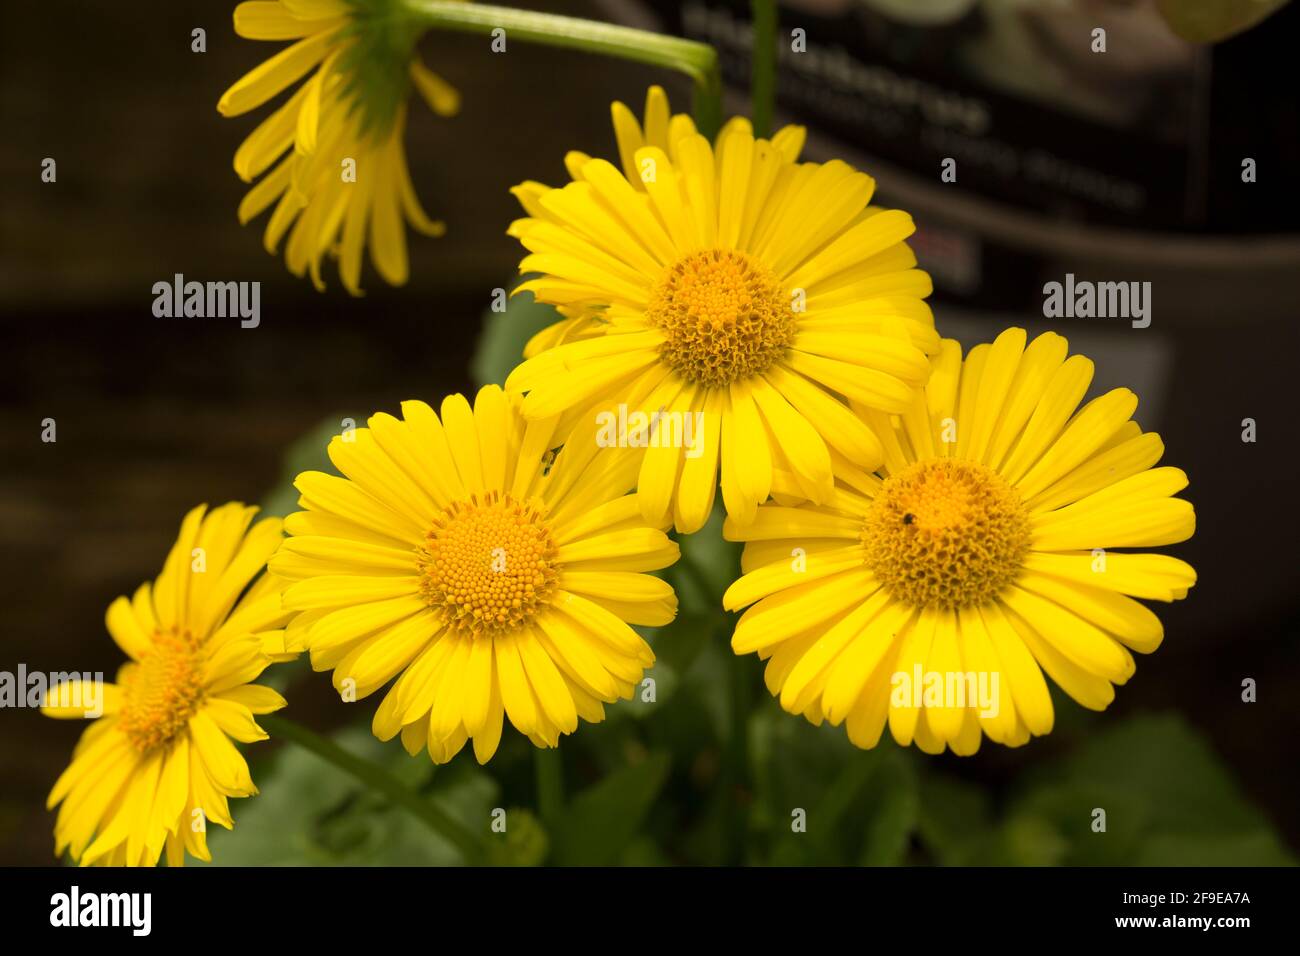 A flowering example of Doronicum Leonardo on display at a garden centre in early April. England UK GB Stock Photo